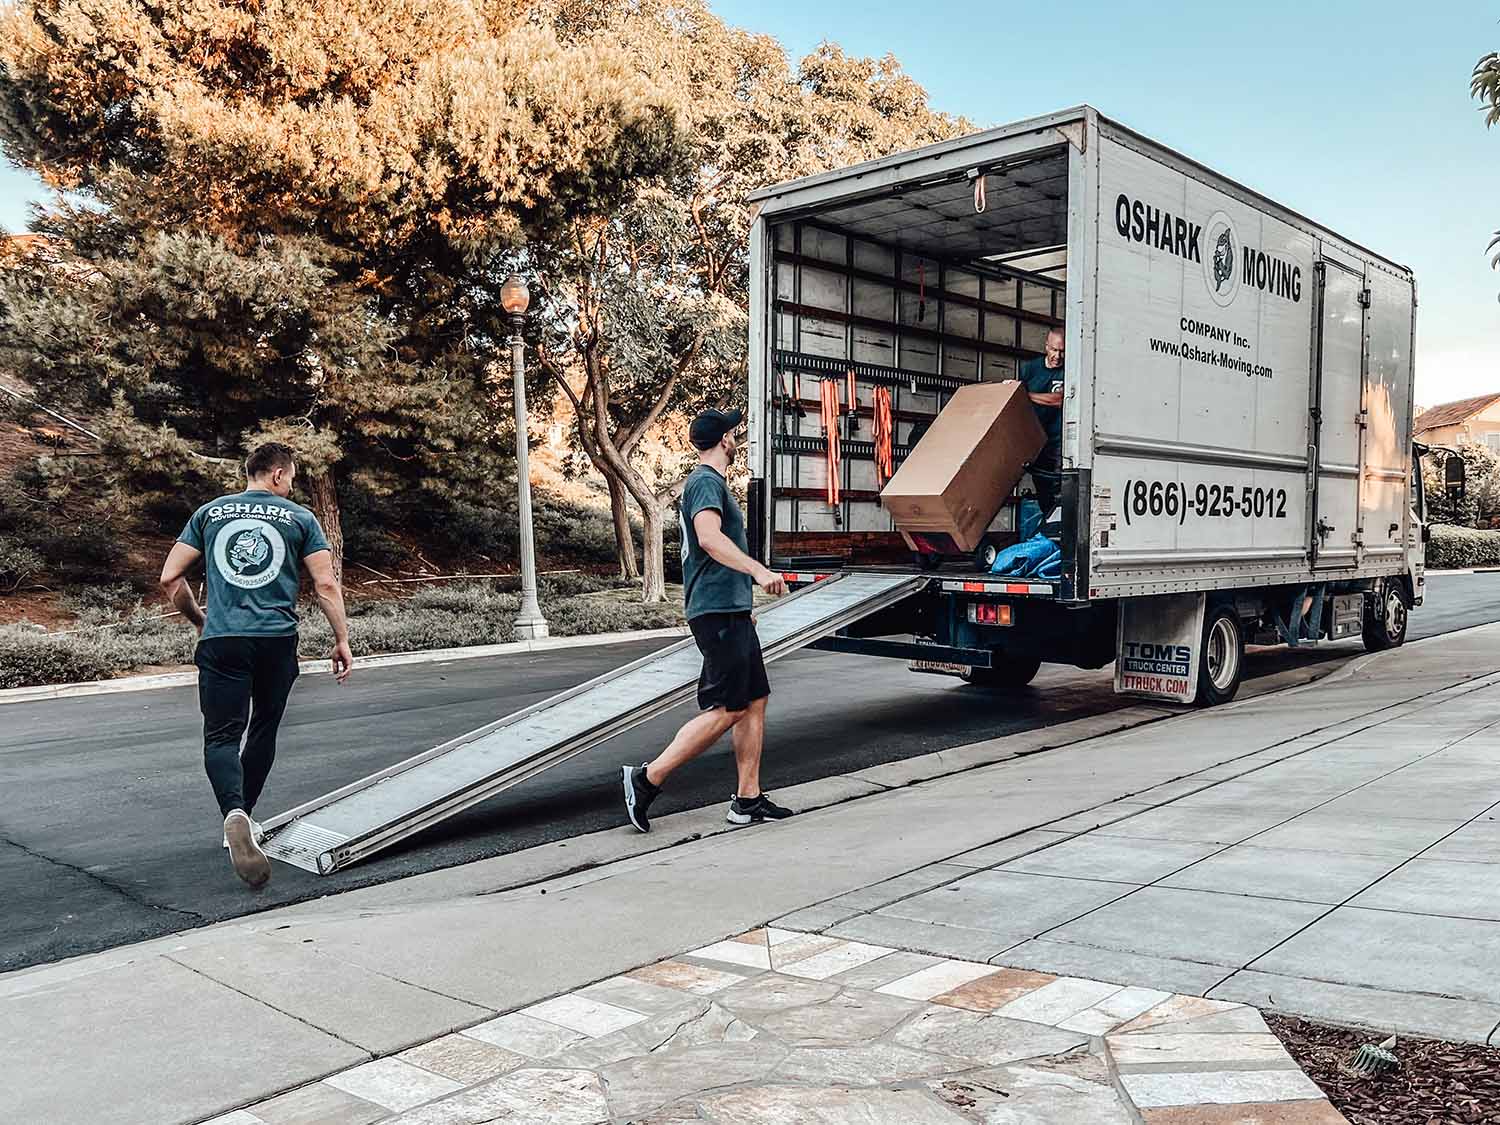 Professional moving team in action, moving furniture and boxes safely and efficiently. Trusted moving company in the area with experienced movers and top-notch equipment.